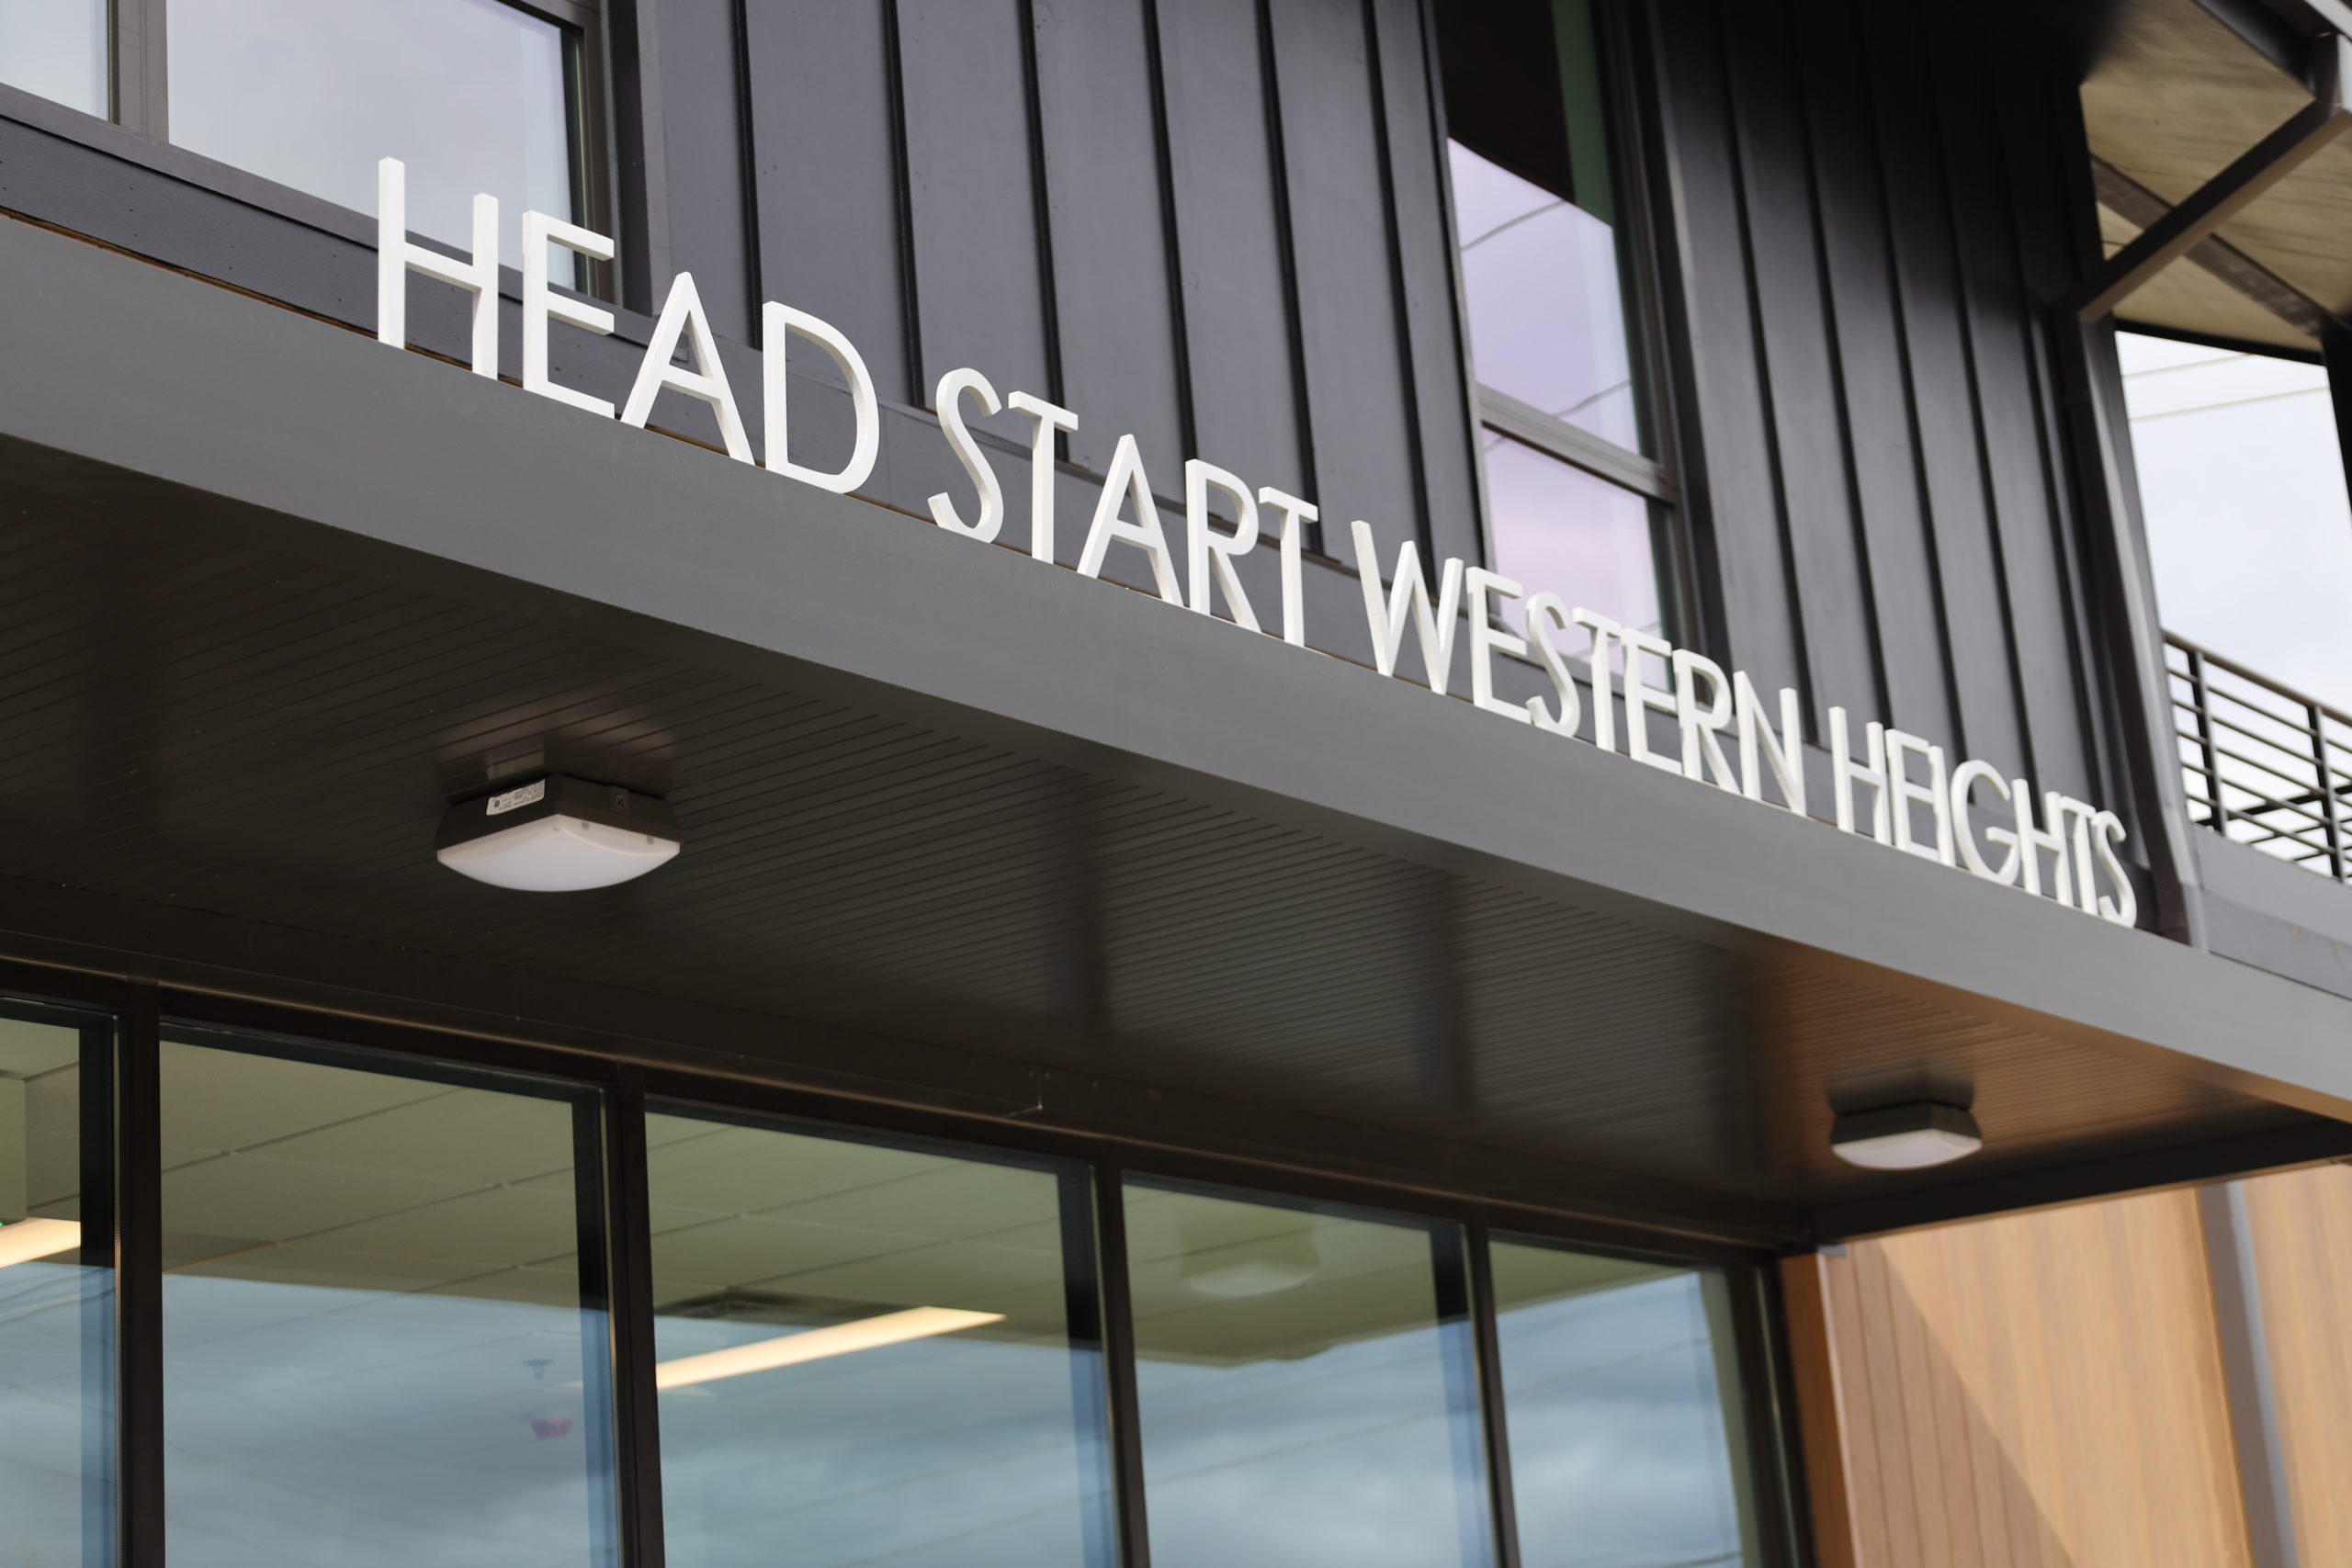 Featured image for “KCDC, CAC officially open Head Start facility at Western Heights”